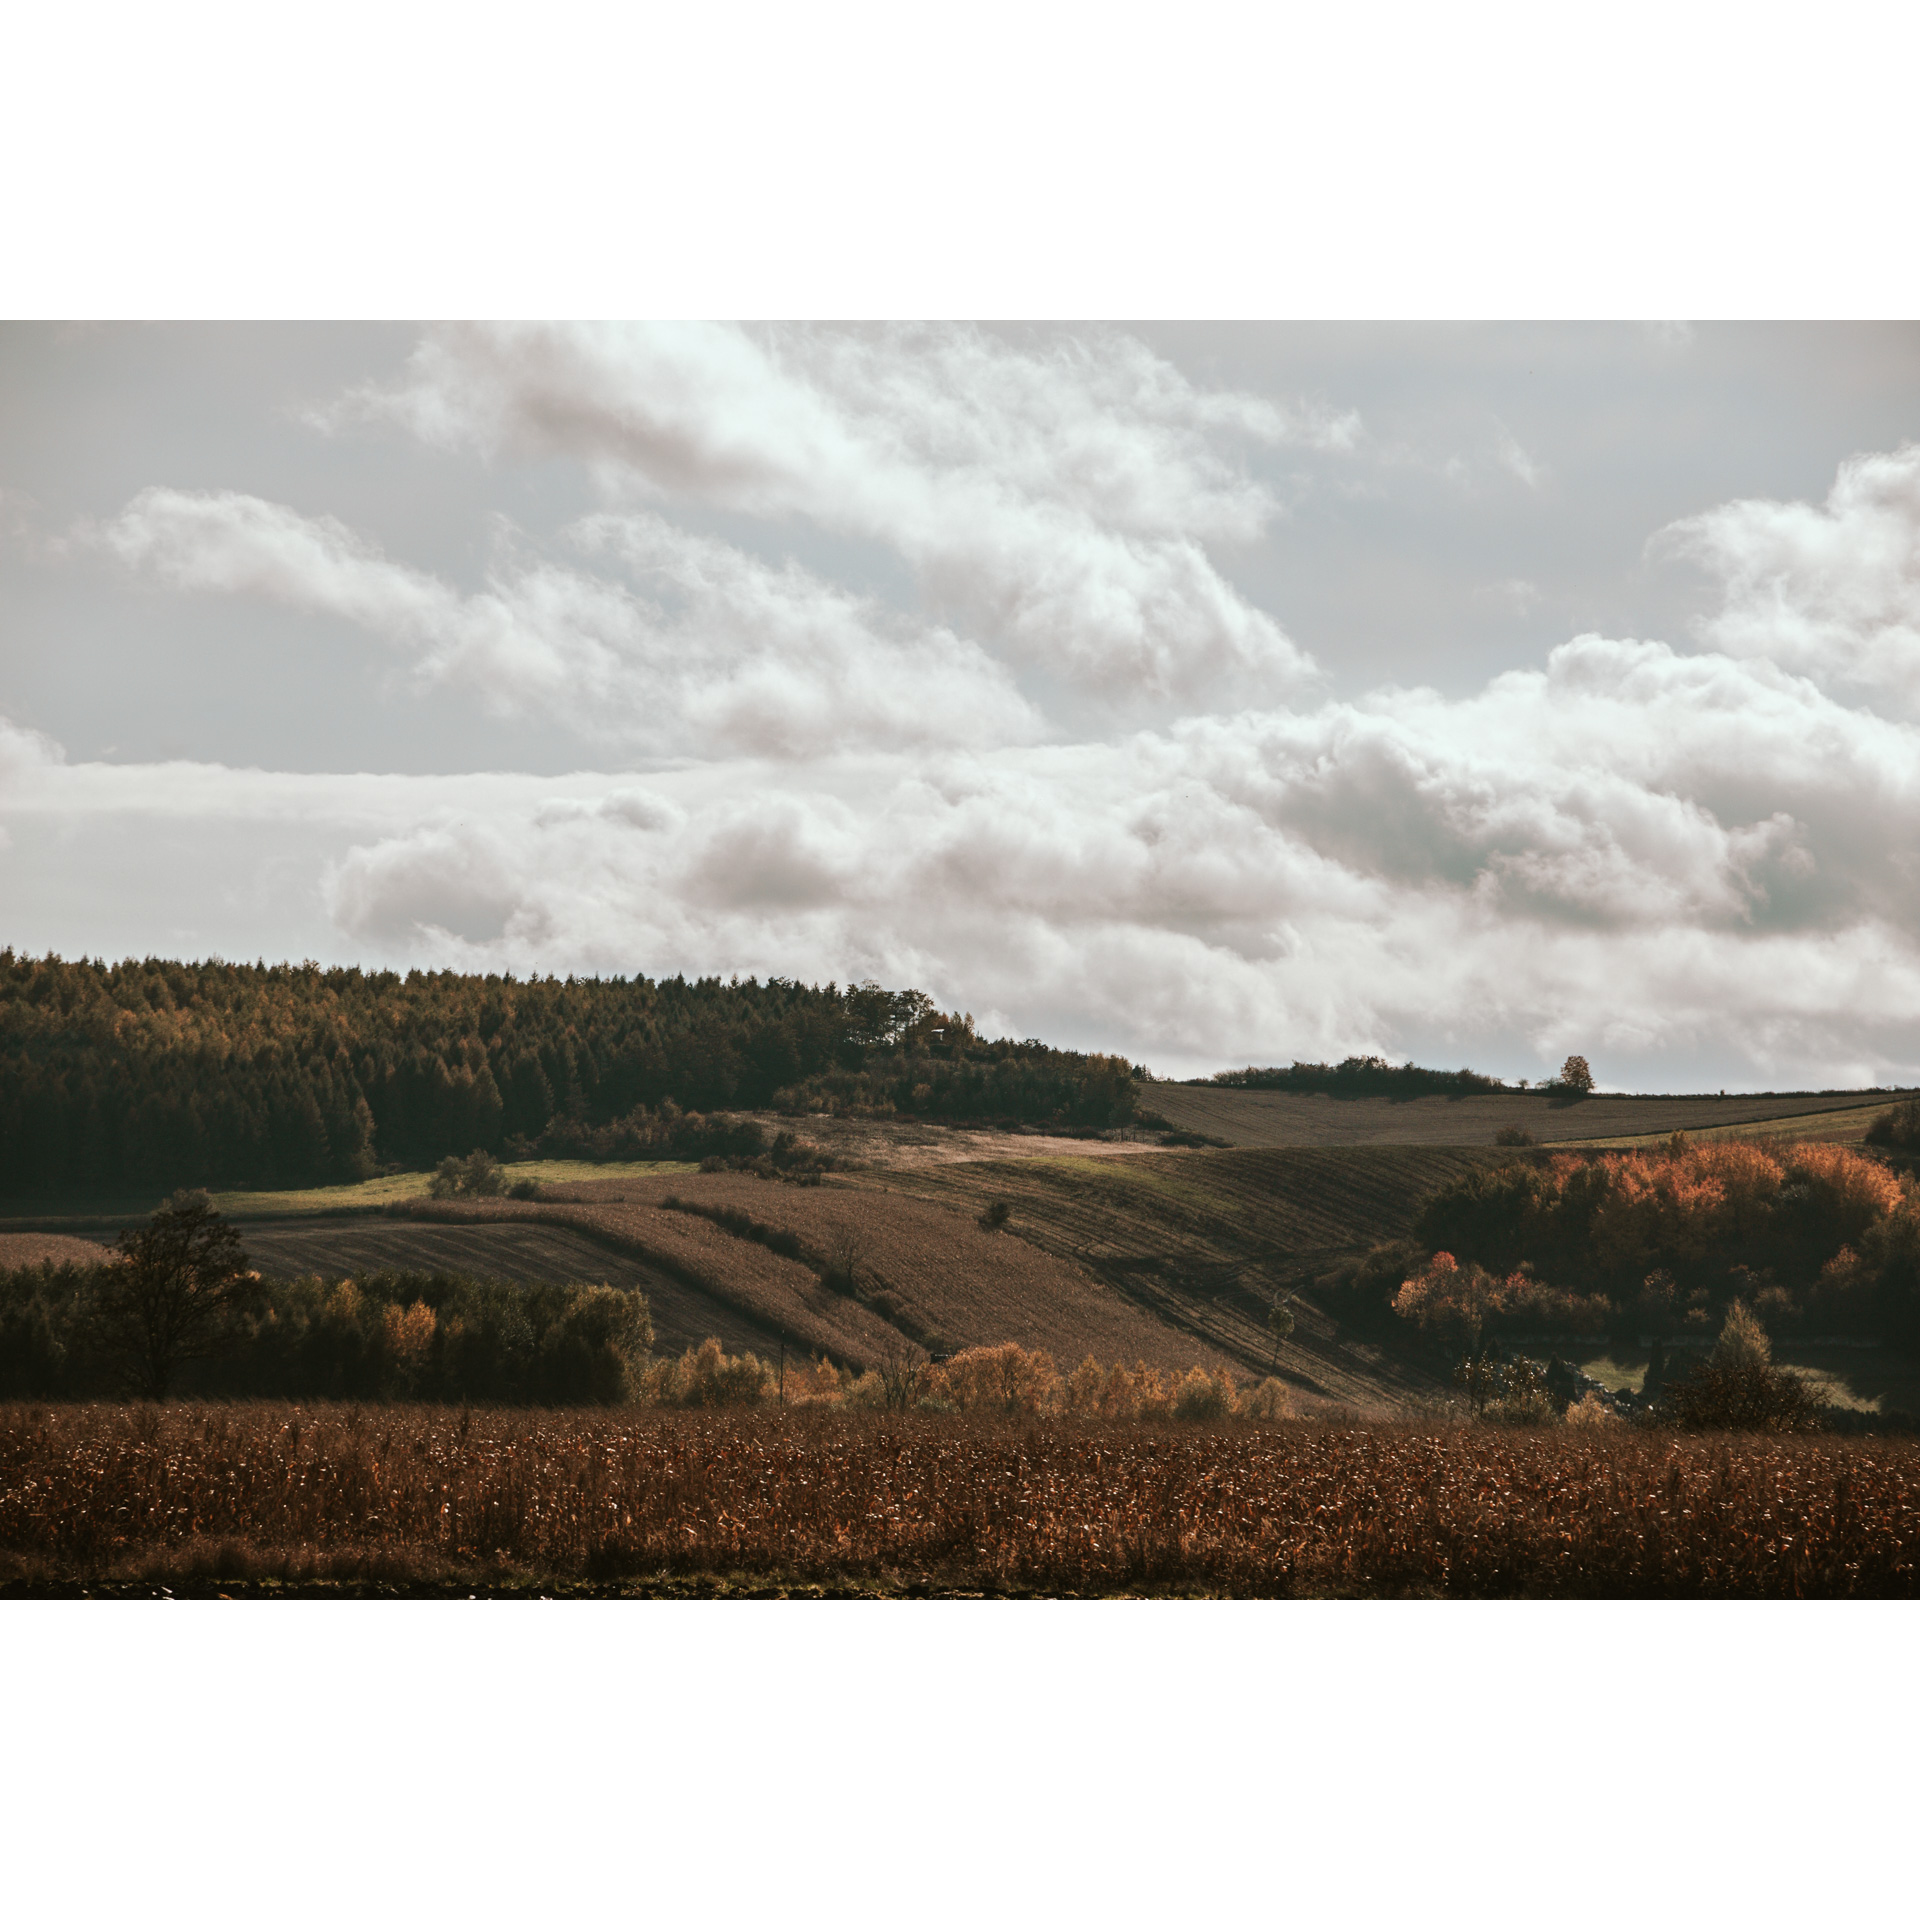 Hills with agricultural fields surrounded by trees with autumn colors